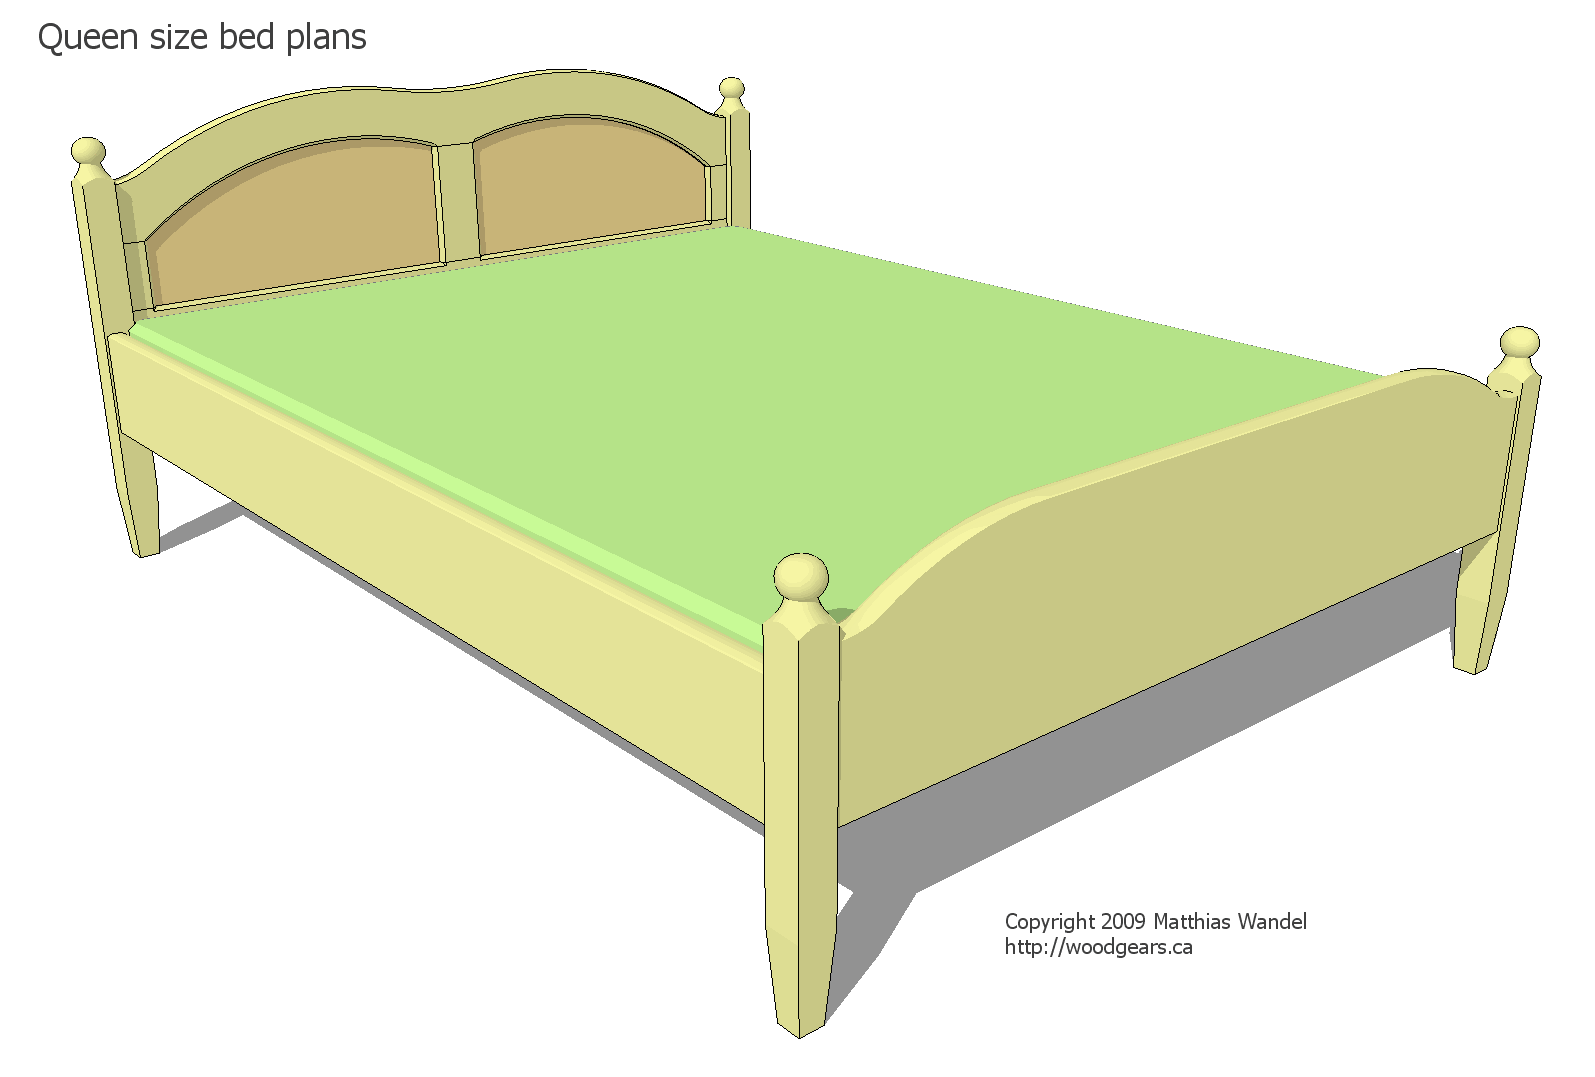 size bed plans plans for a bed with queen size size mattress 60 x80 ...